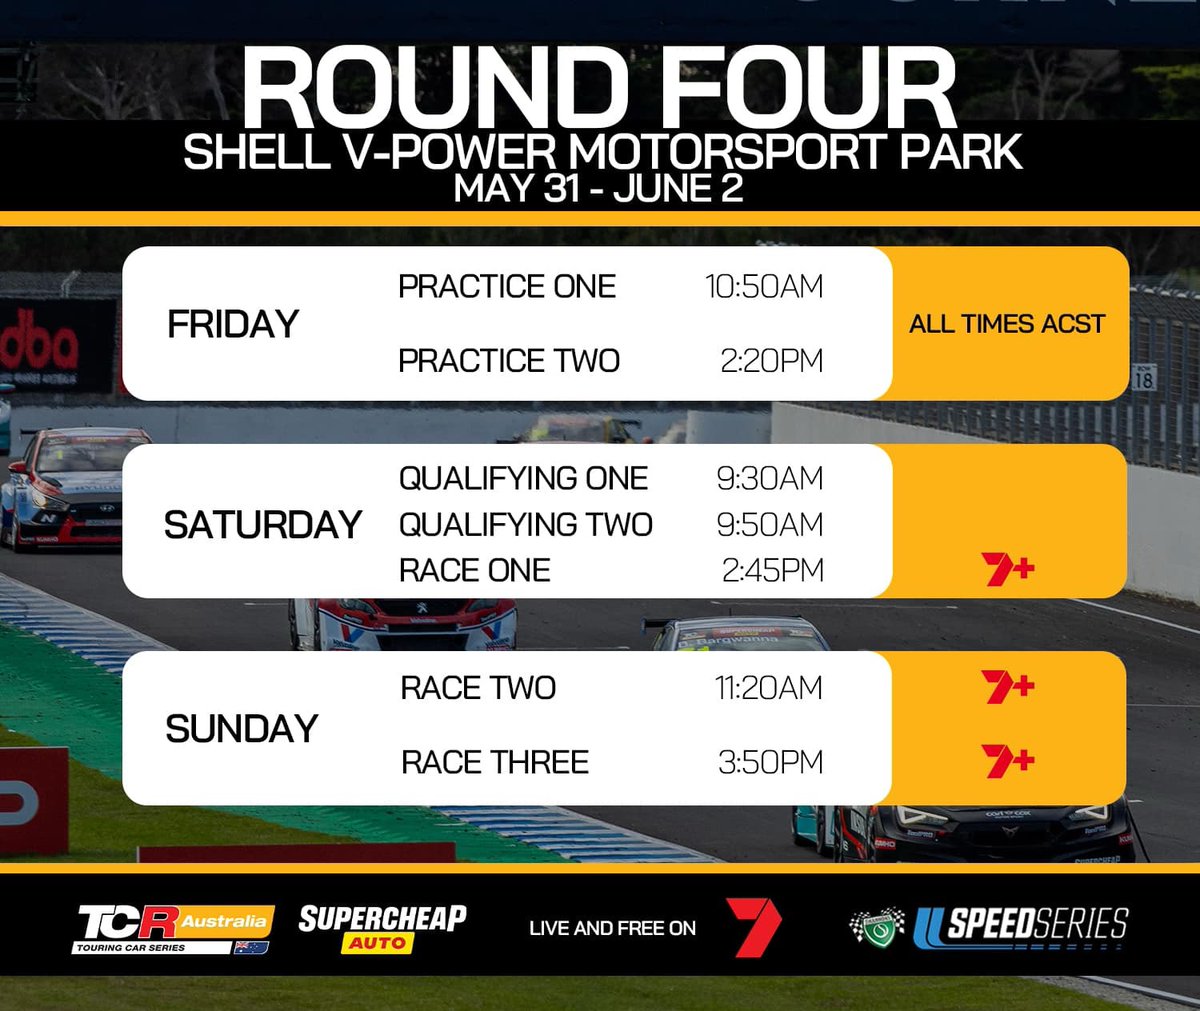 💥TCRWorld🌏
TCRAustralia at Shell V-Power Motorsport Park🇦🇺

7️⃣ - All three races live and free on 7plus!
🌏 - International viewers can tune in via the SpeedSeries website!
🕖 - Live coverage from 10:00am to 4:30pm (local time) Saturday and Sunday!

#TCRSeries #TCRAustralia